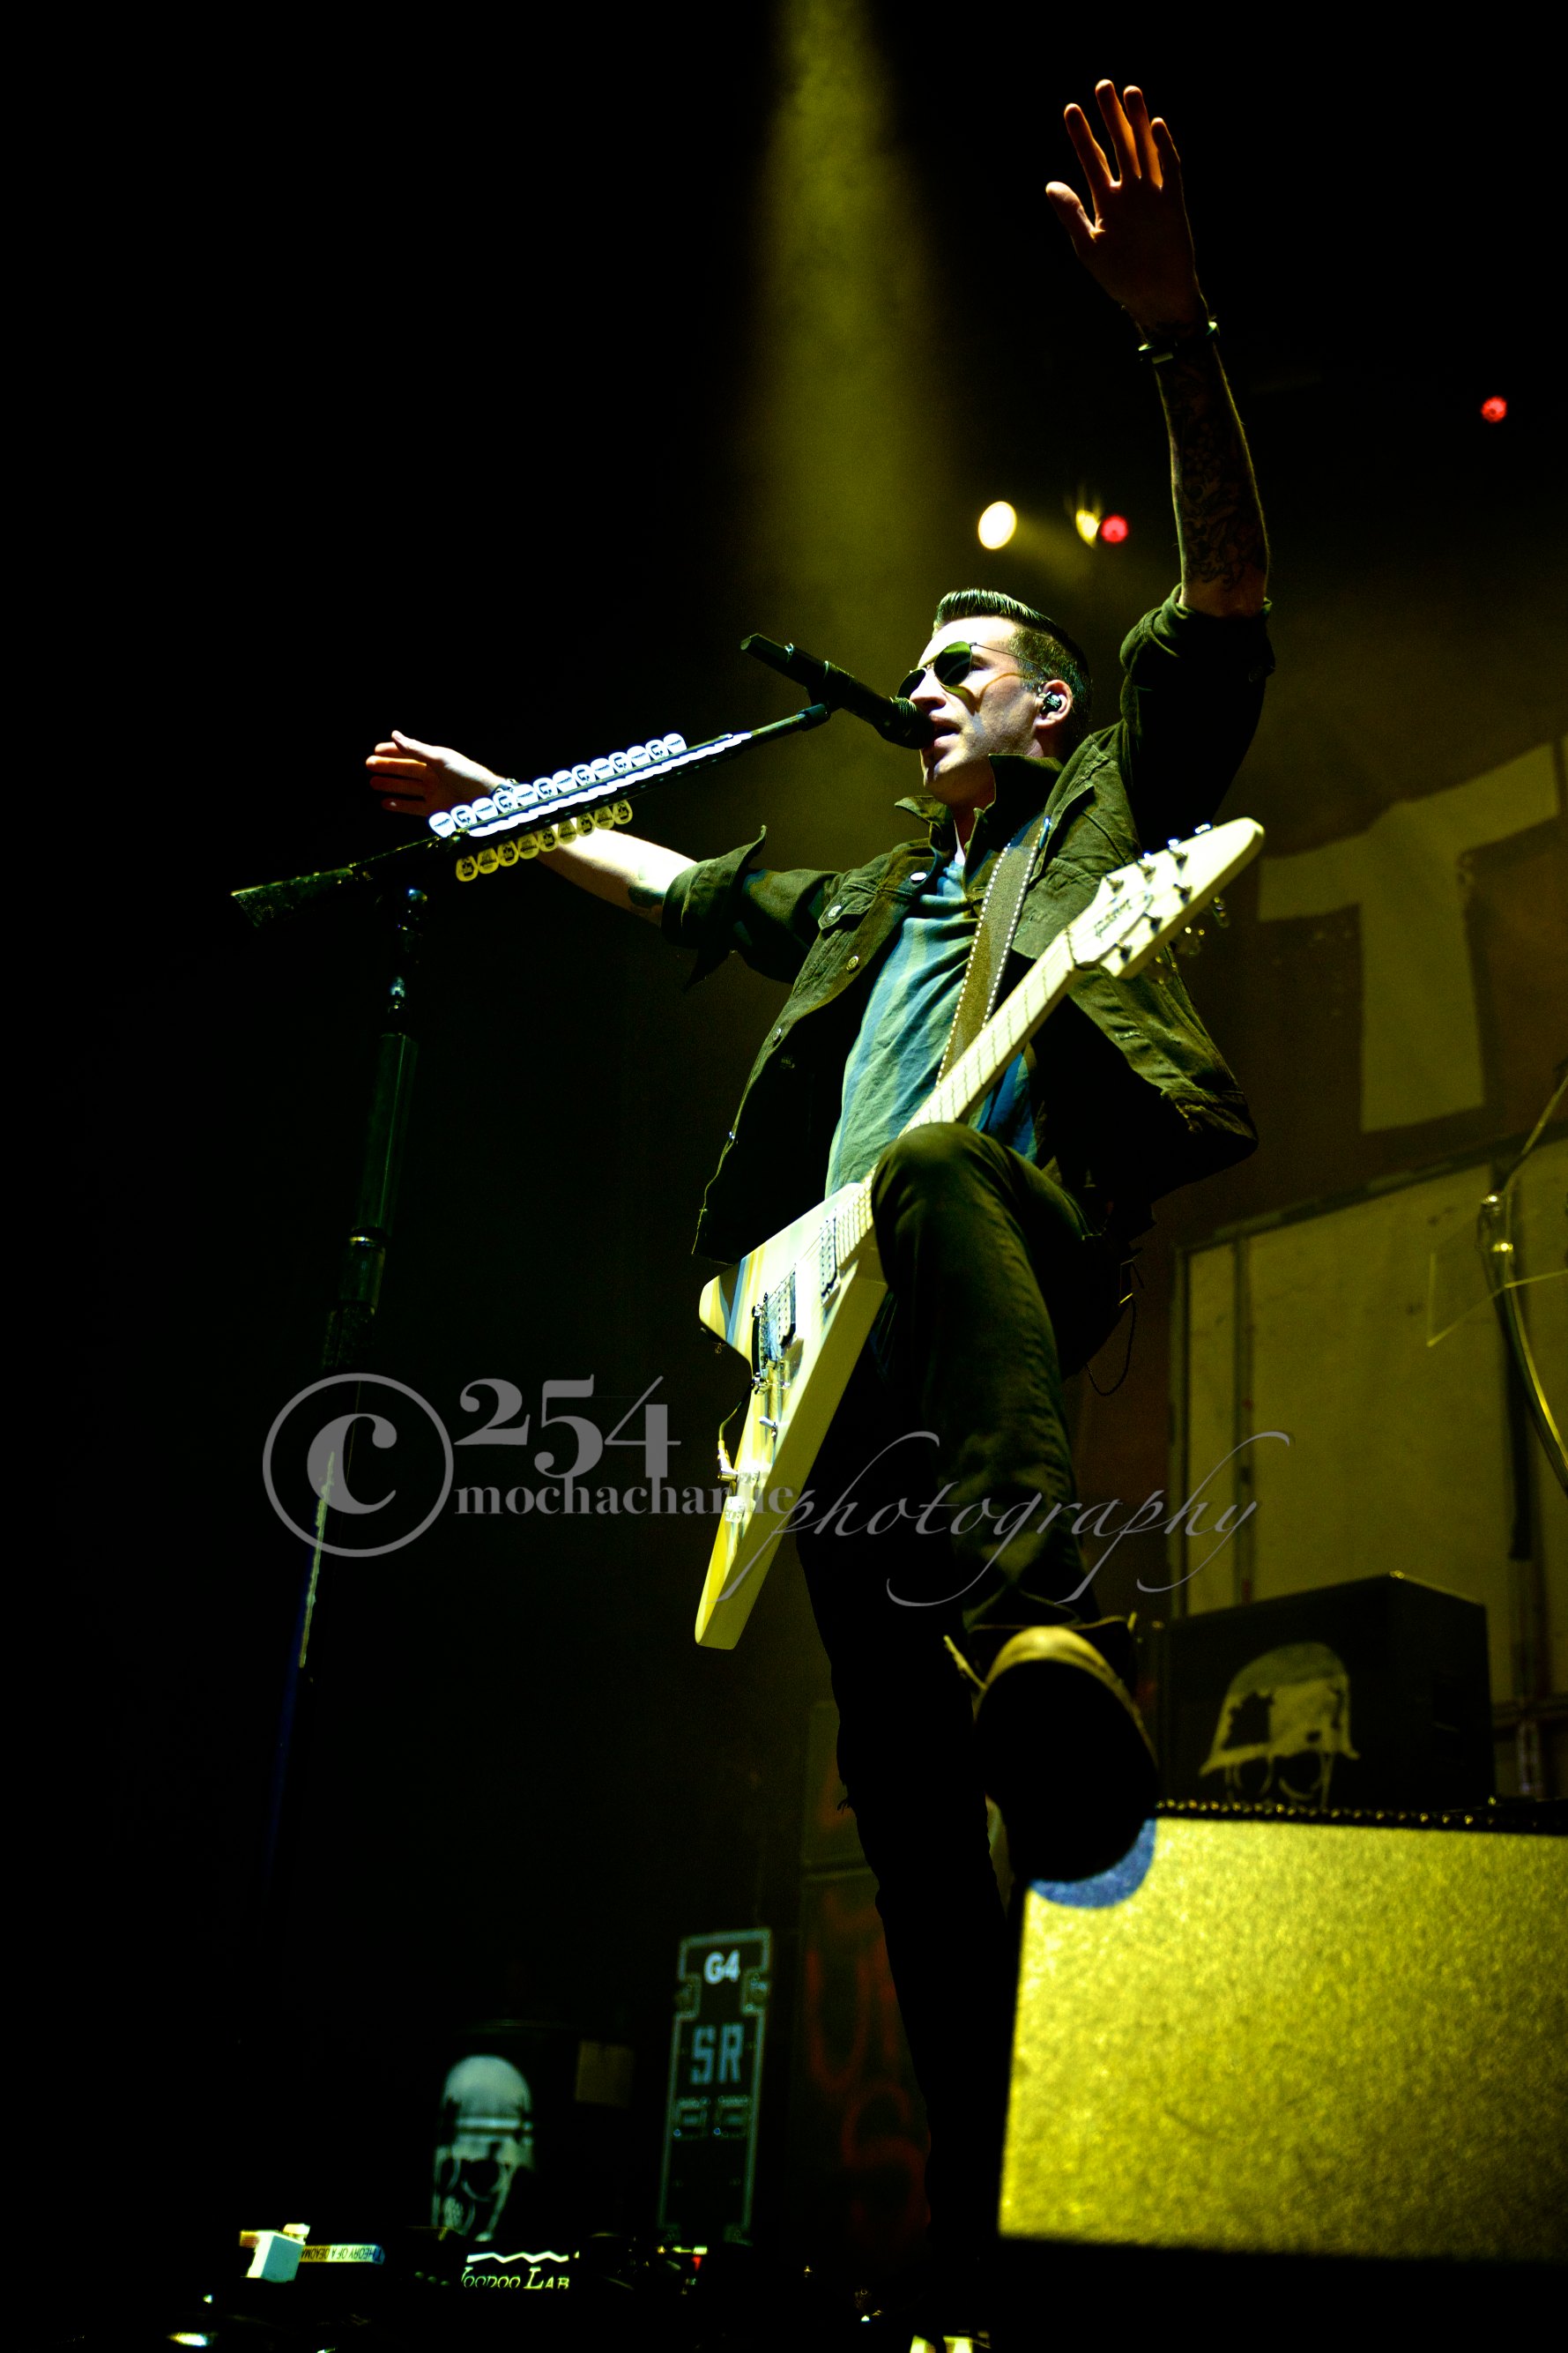 Theory of a Deadman at Uproar (Photo by Mocha Charlie)